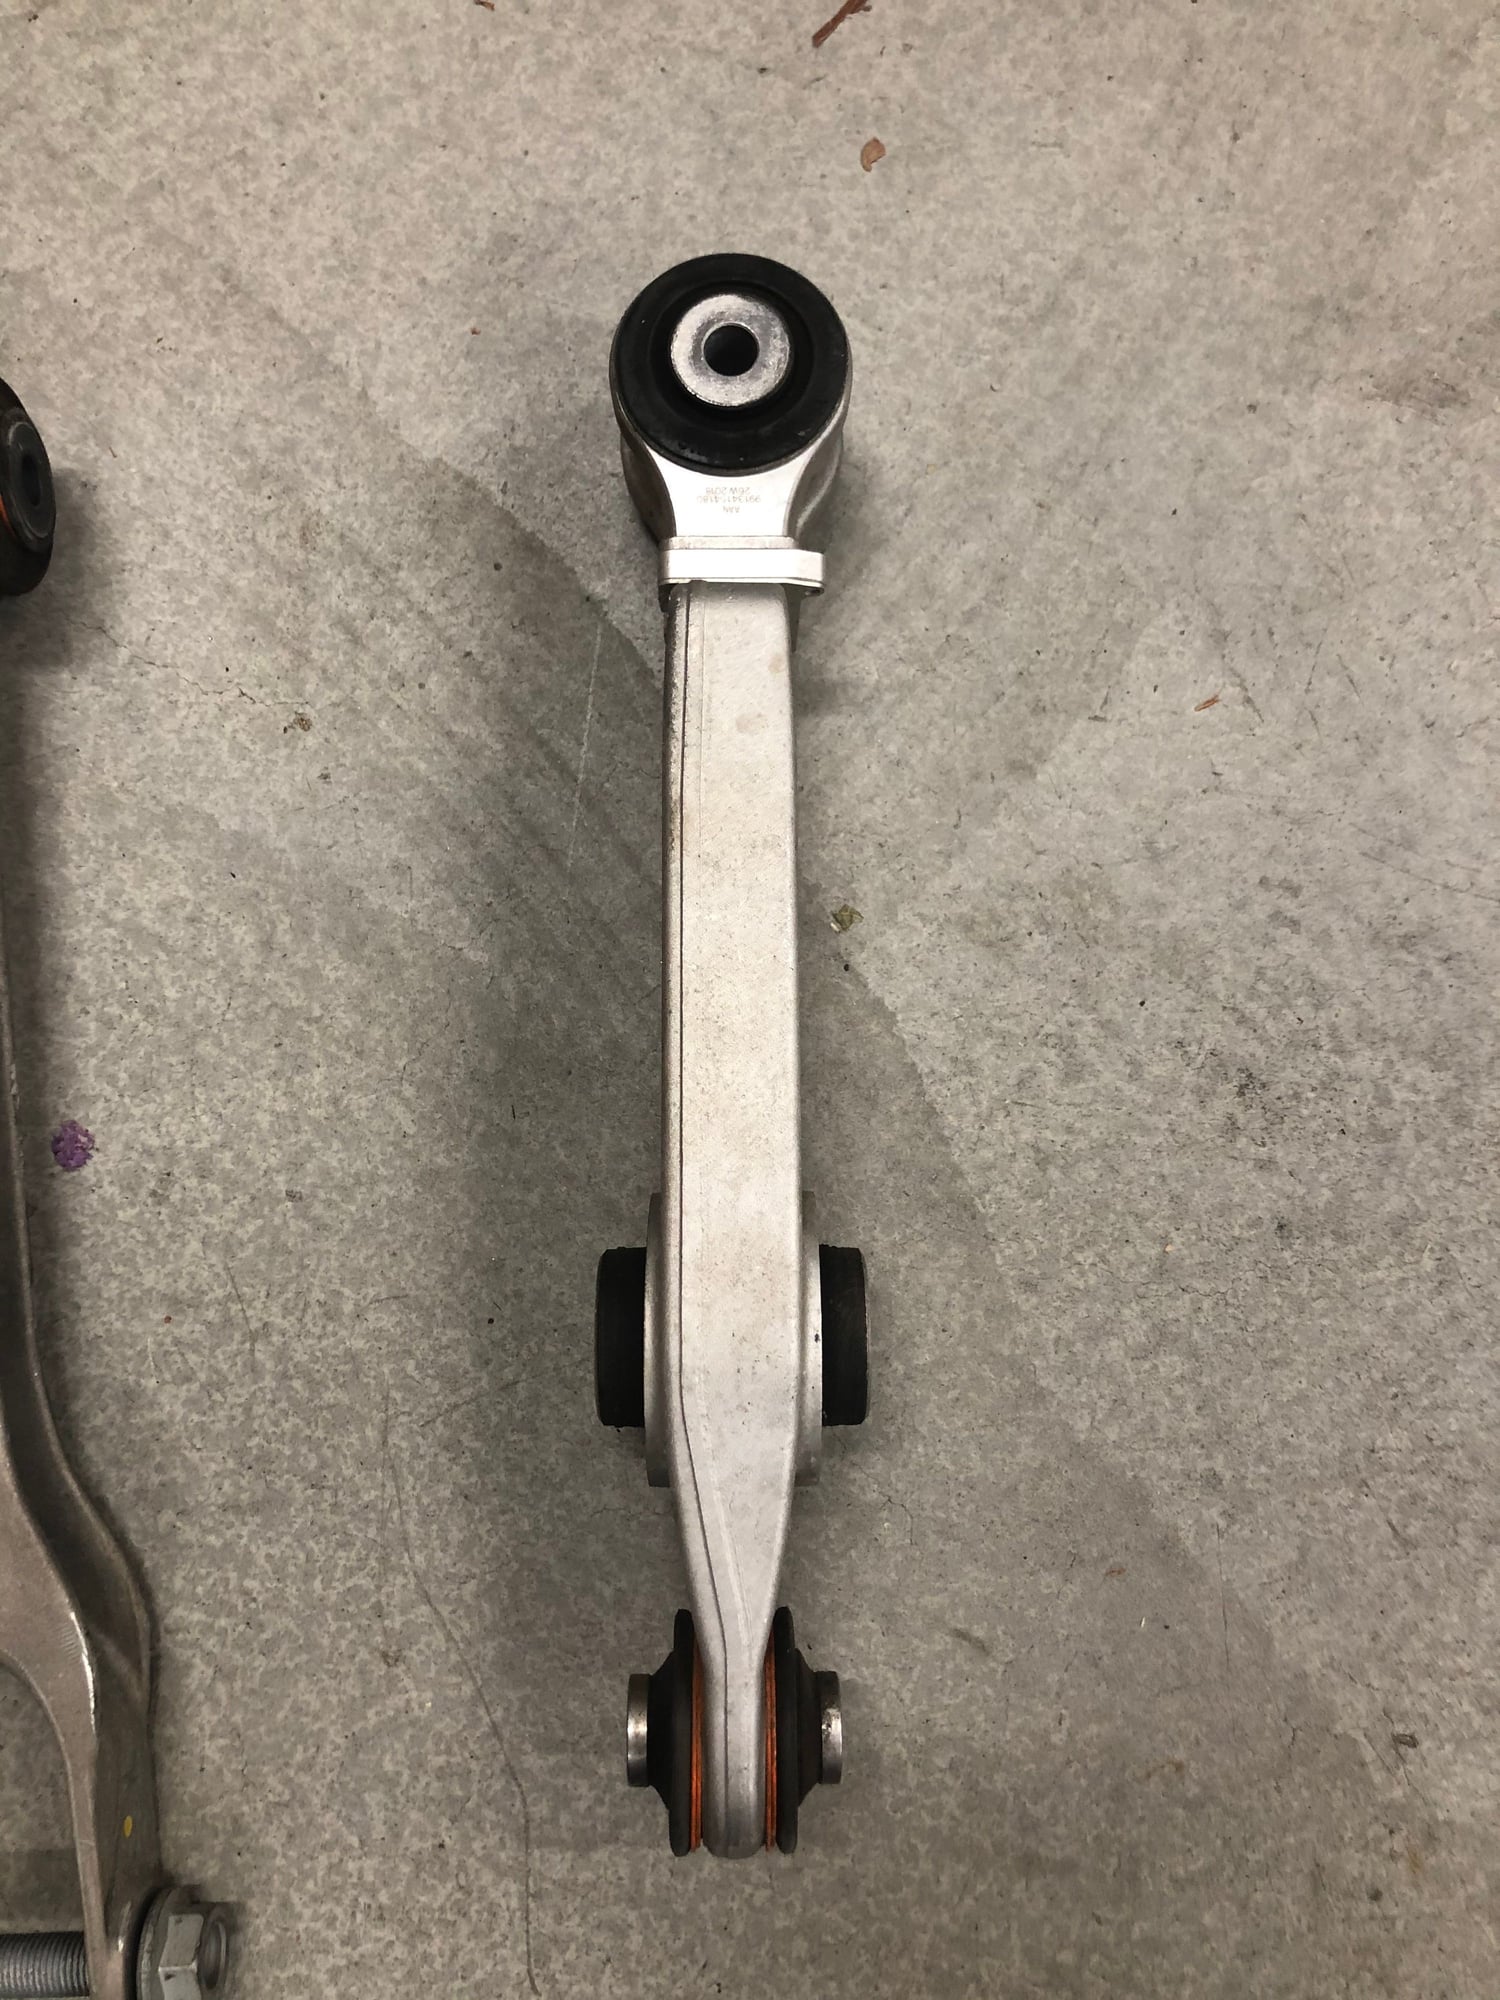 2018 Porsche GT3 - GT3 complete lower control arm with 5mm shim and thrust arm - Steering/Suspension - $500 - Irvine, CA 92620, United States